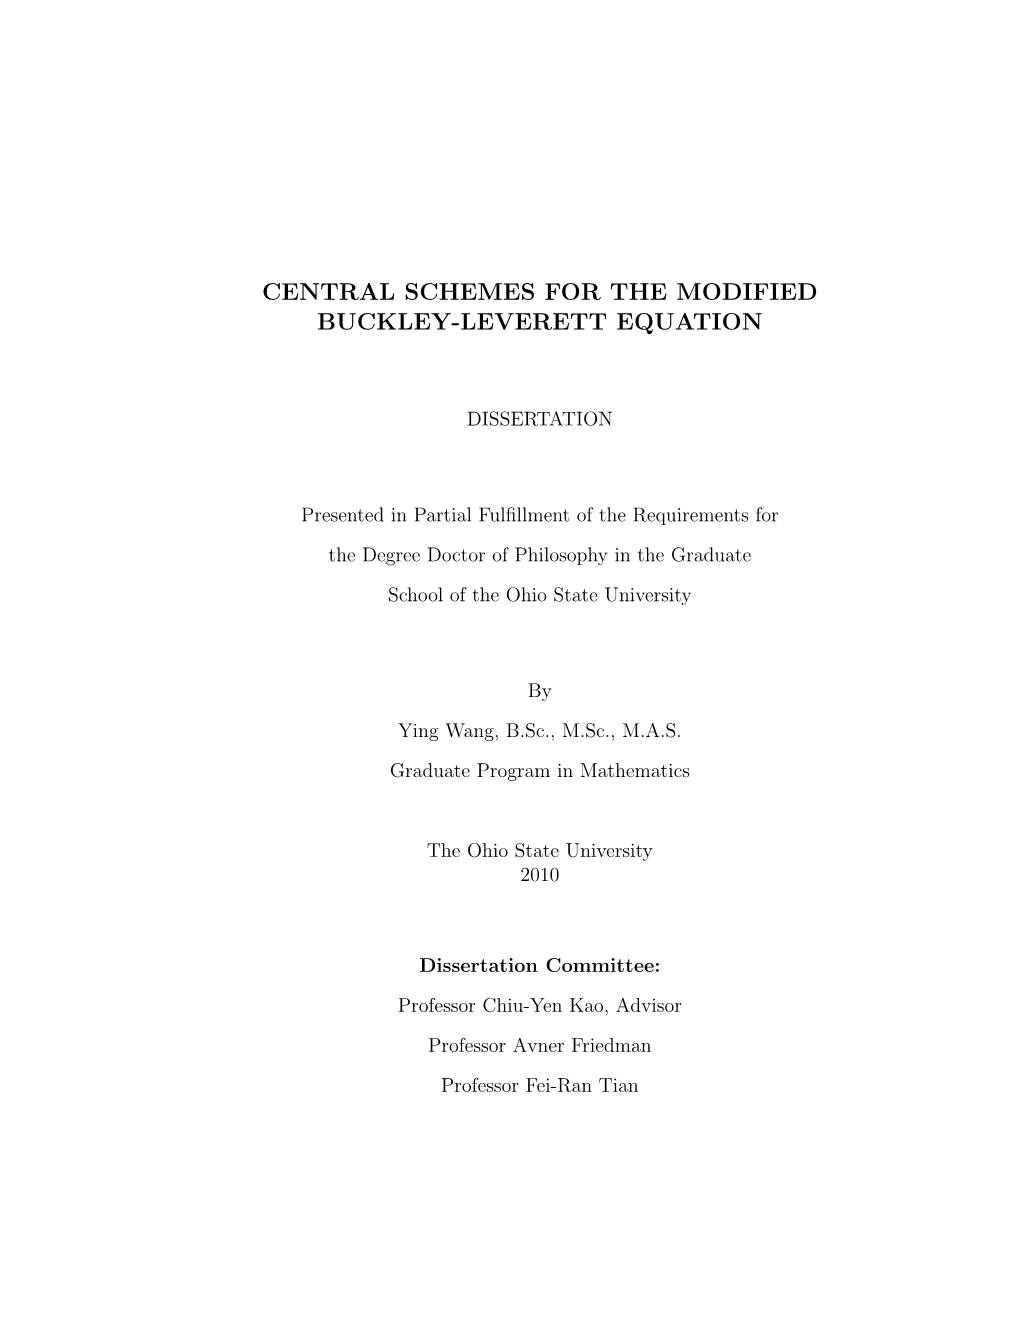 Central Schemes for the Modified Buckley-Leverett Equation